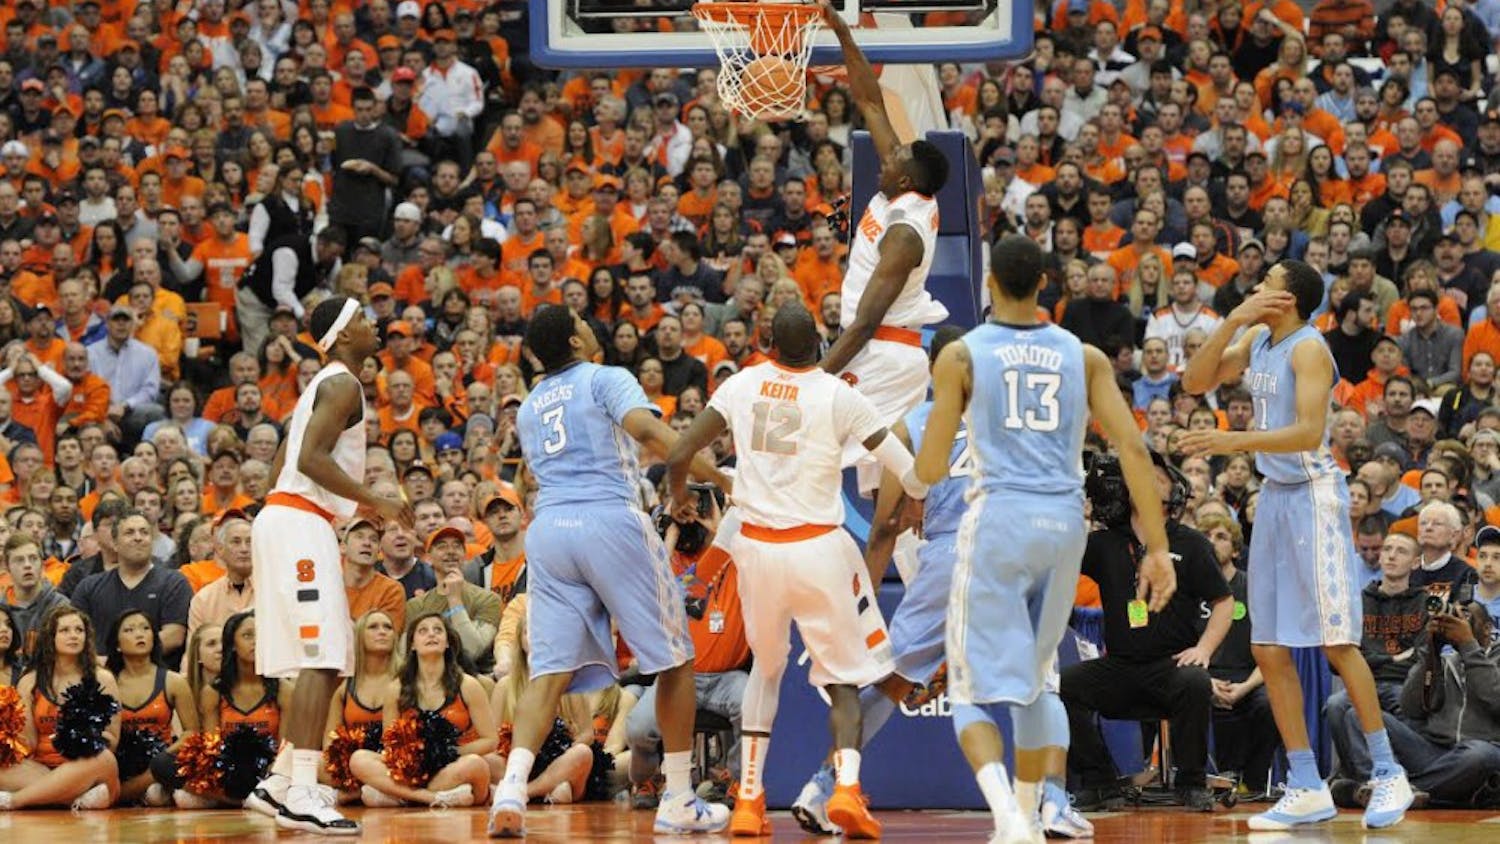 UNC men’s basketball players watch as former Syracuse forward Jerami Grant dunks in a game. Courtesy of The Daily Orange.